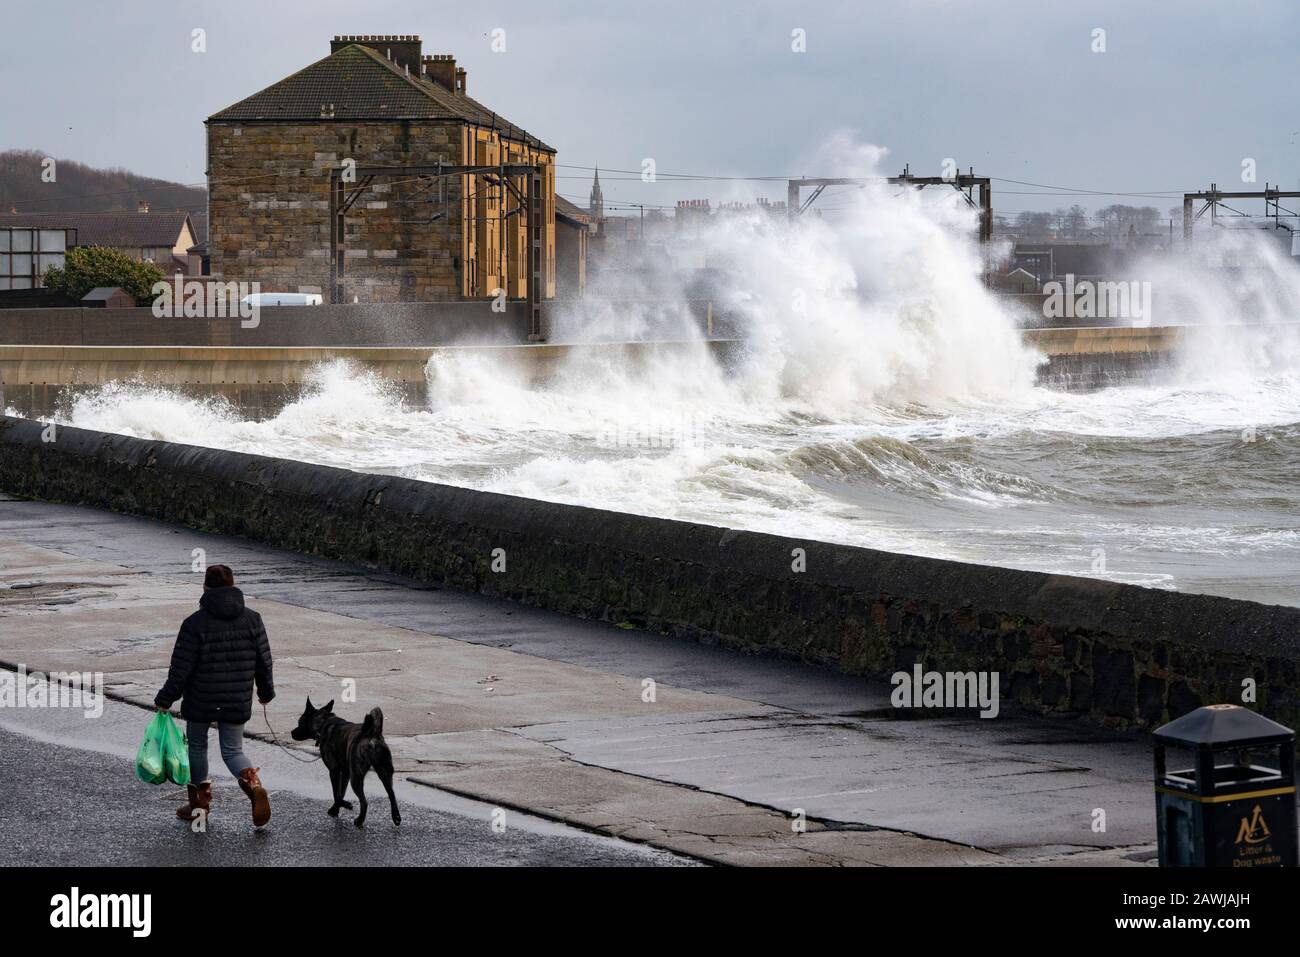 Saltcoats, Scotland, UK. 9 February, 2020.  Storm Ciara creates large waves breaking over seawall at Saltcoats in Ayrshire. Train services on the adjacent railway have been interrupted. With high tide due at midday and winds expected to increase in speed later in the day, the height of the waves are expected to dramatically increase Iain Masterton/Alamy Live News. Stock Photo